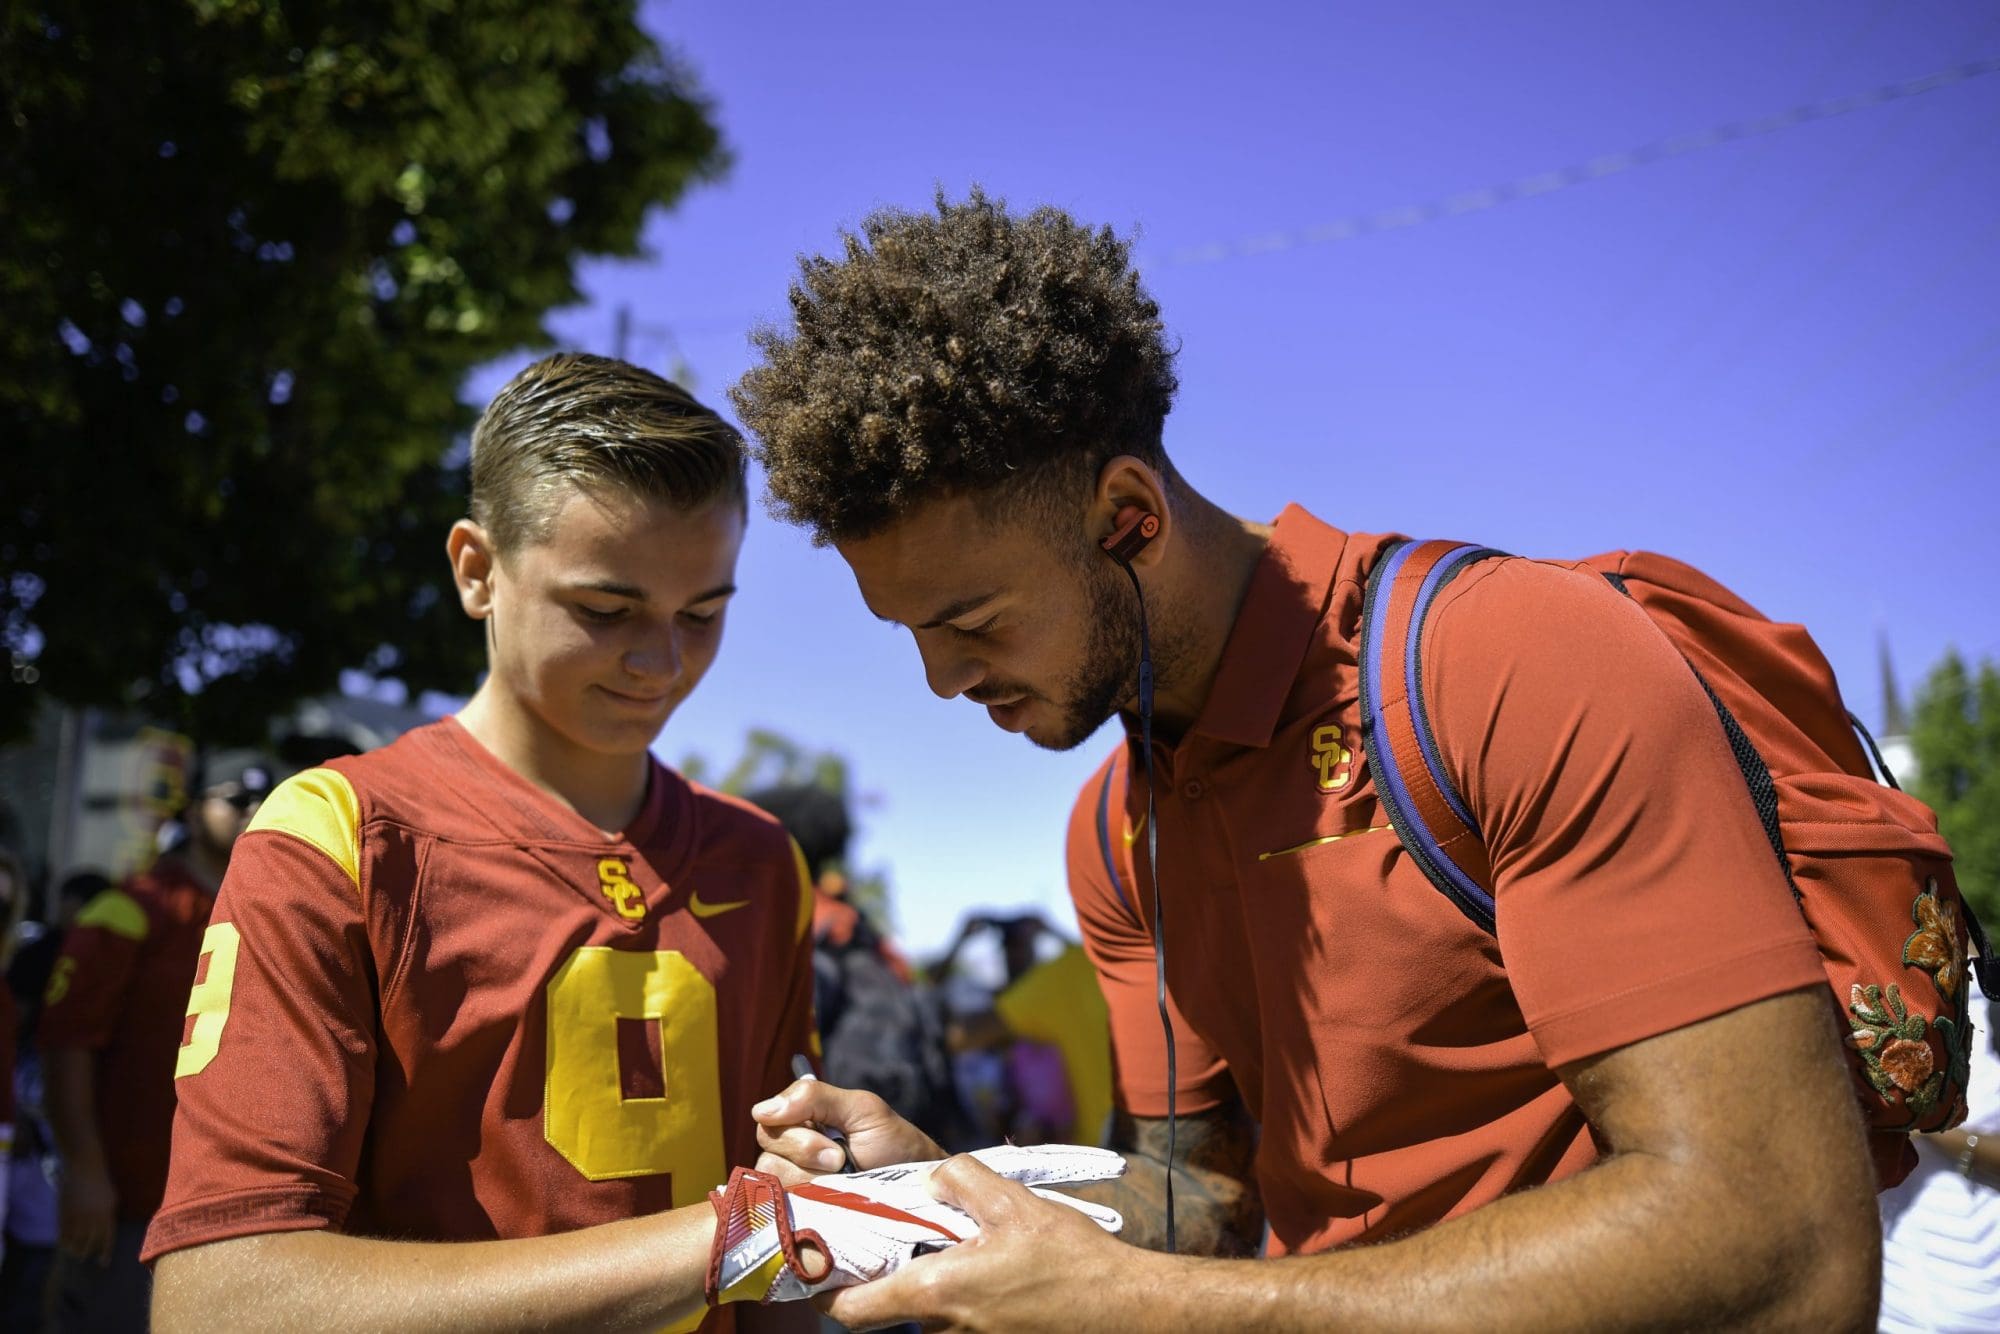 A young male athlete in a red and gold football jersey autographs memorabilia for a fan, also wearing a similar jersey, during a sunny outdoor meet-and-greet event.